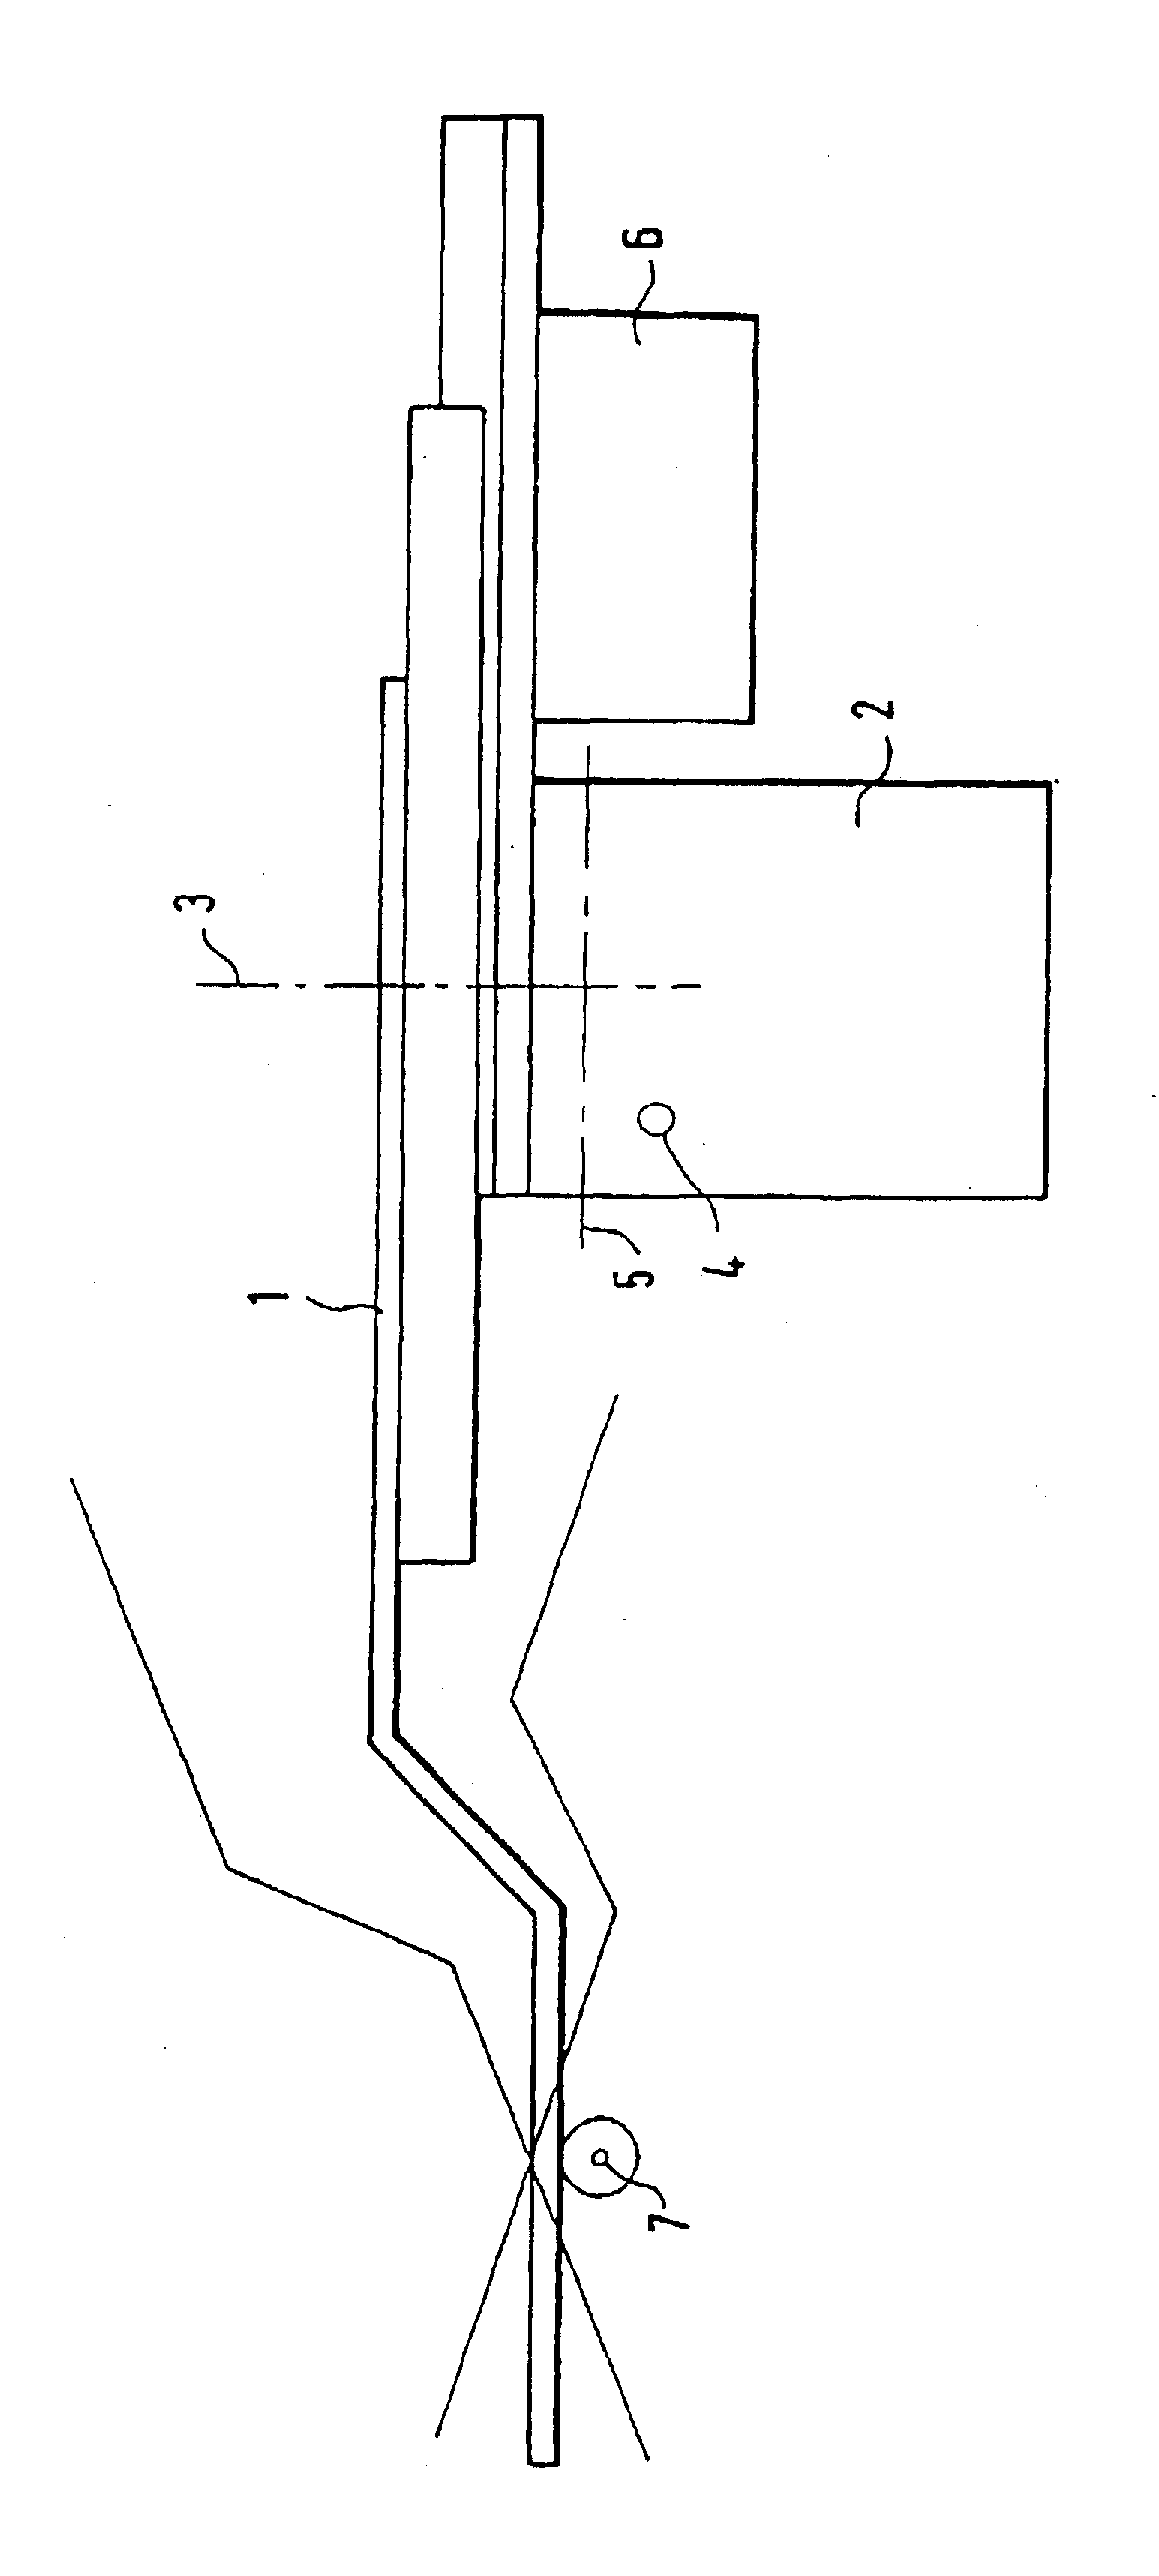 Medical apparatus having a support table for treatment and/or examination of a subject thereon